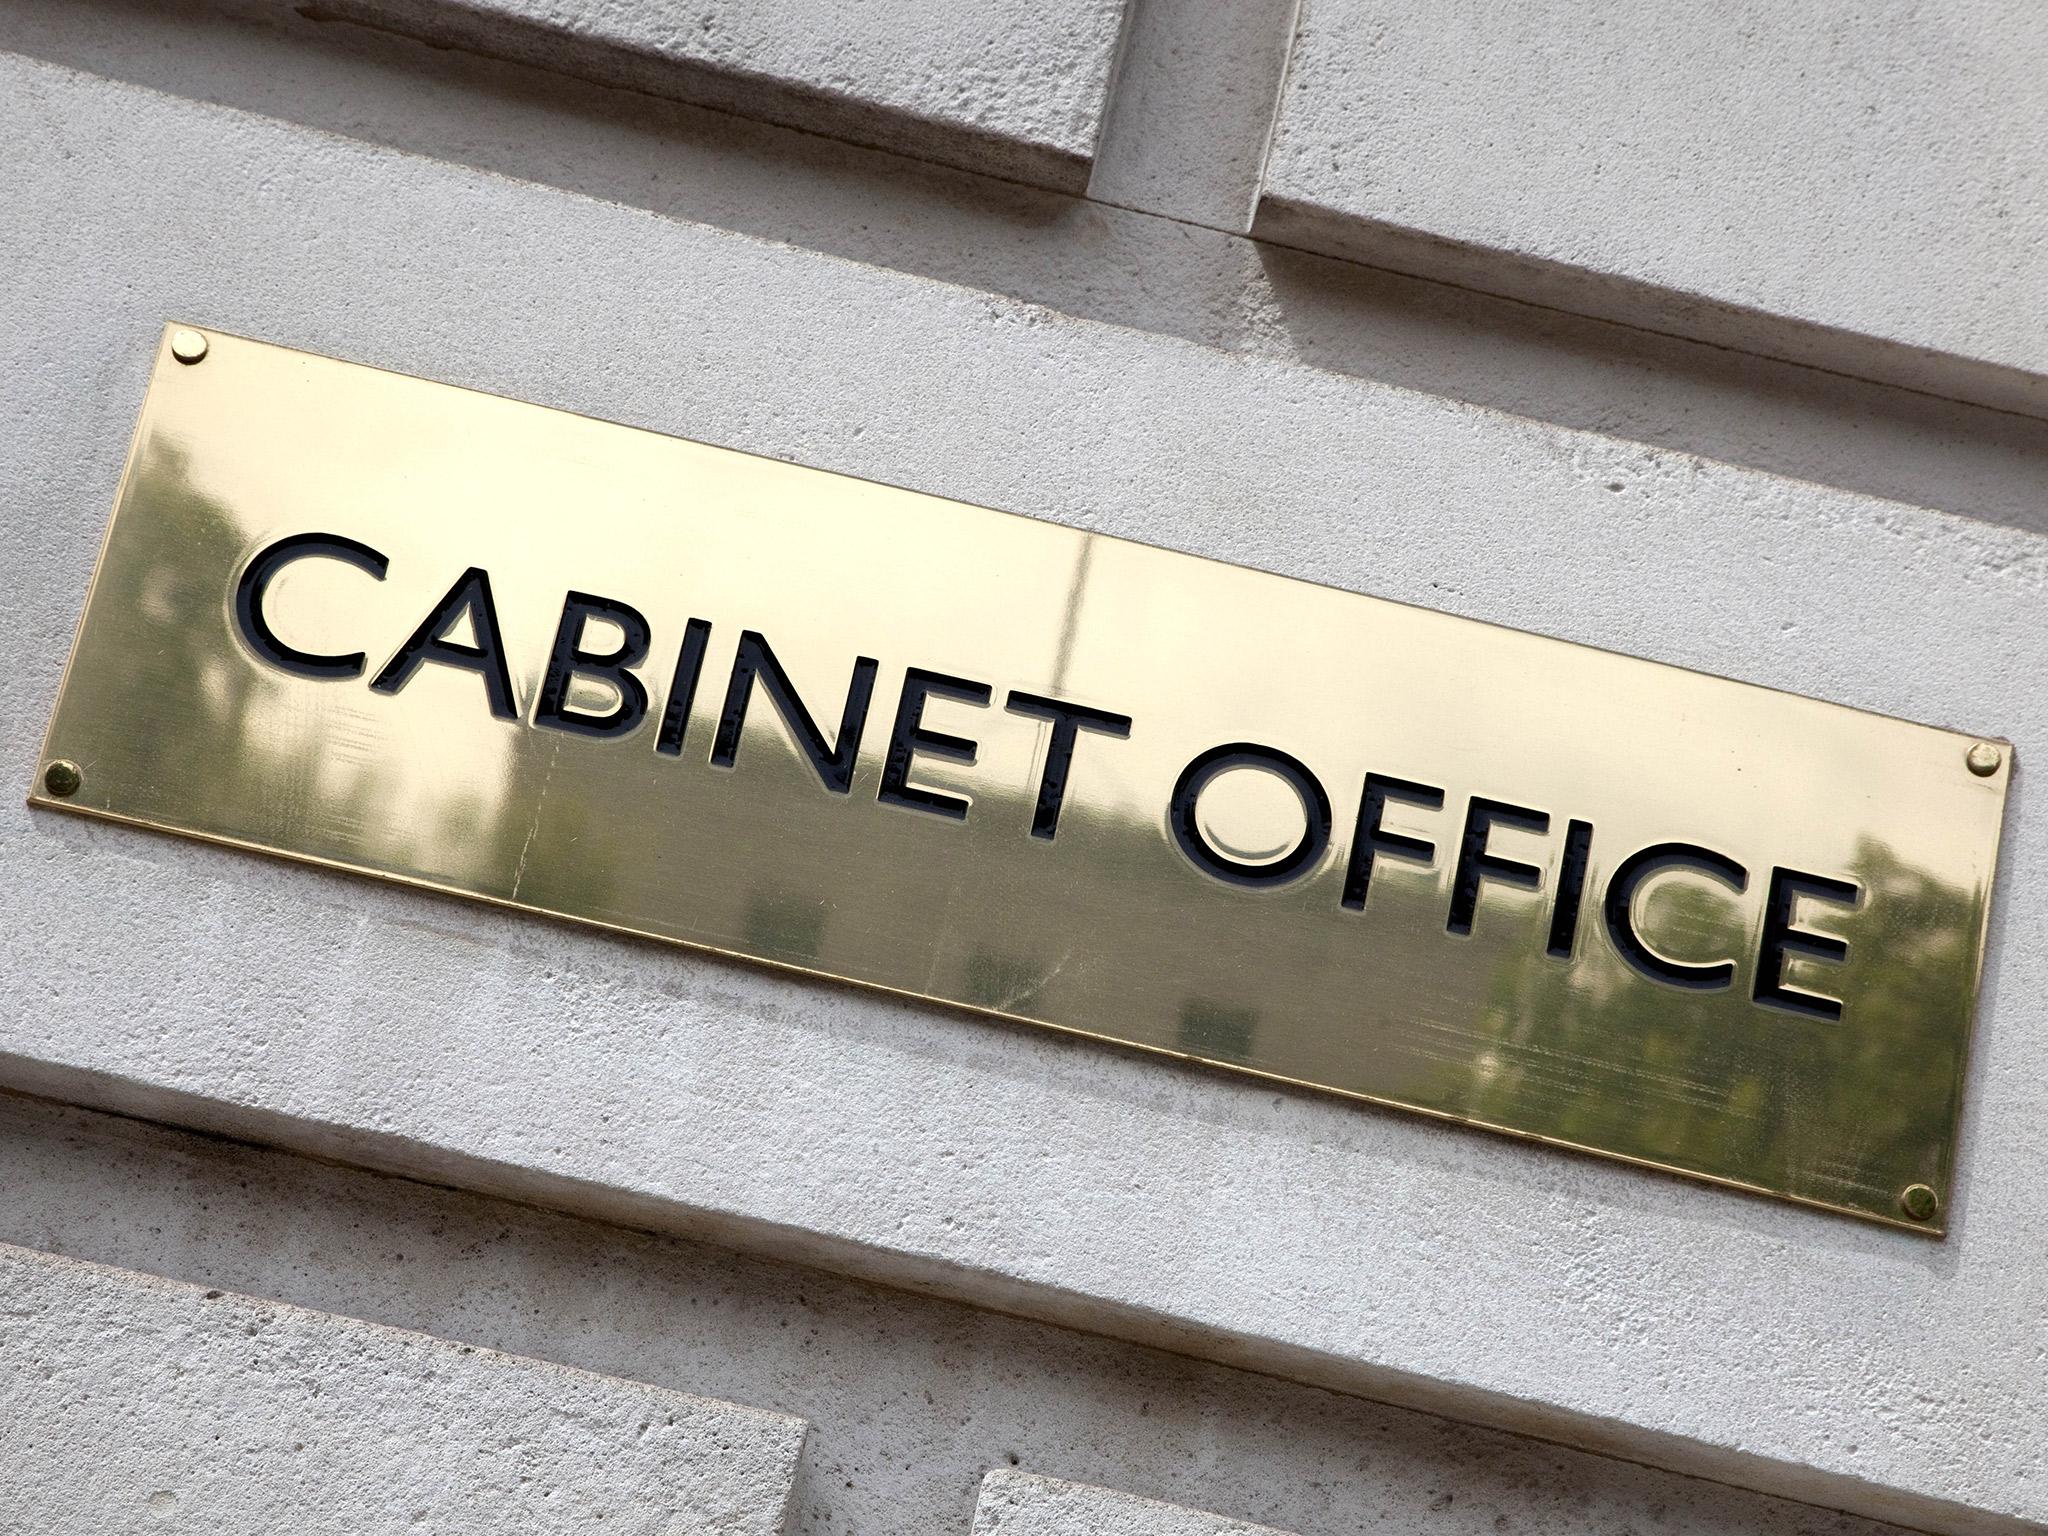 The Cabinet Office said it was investigating the allegations about the contract